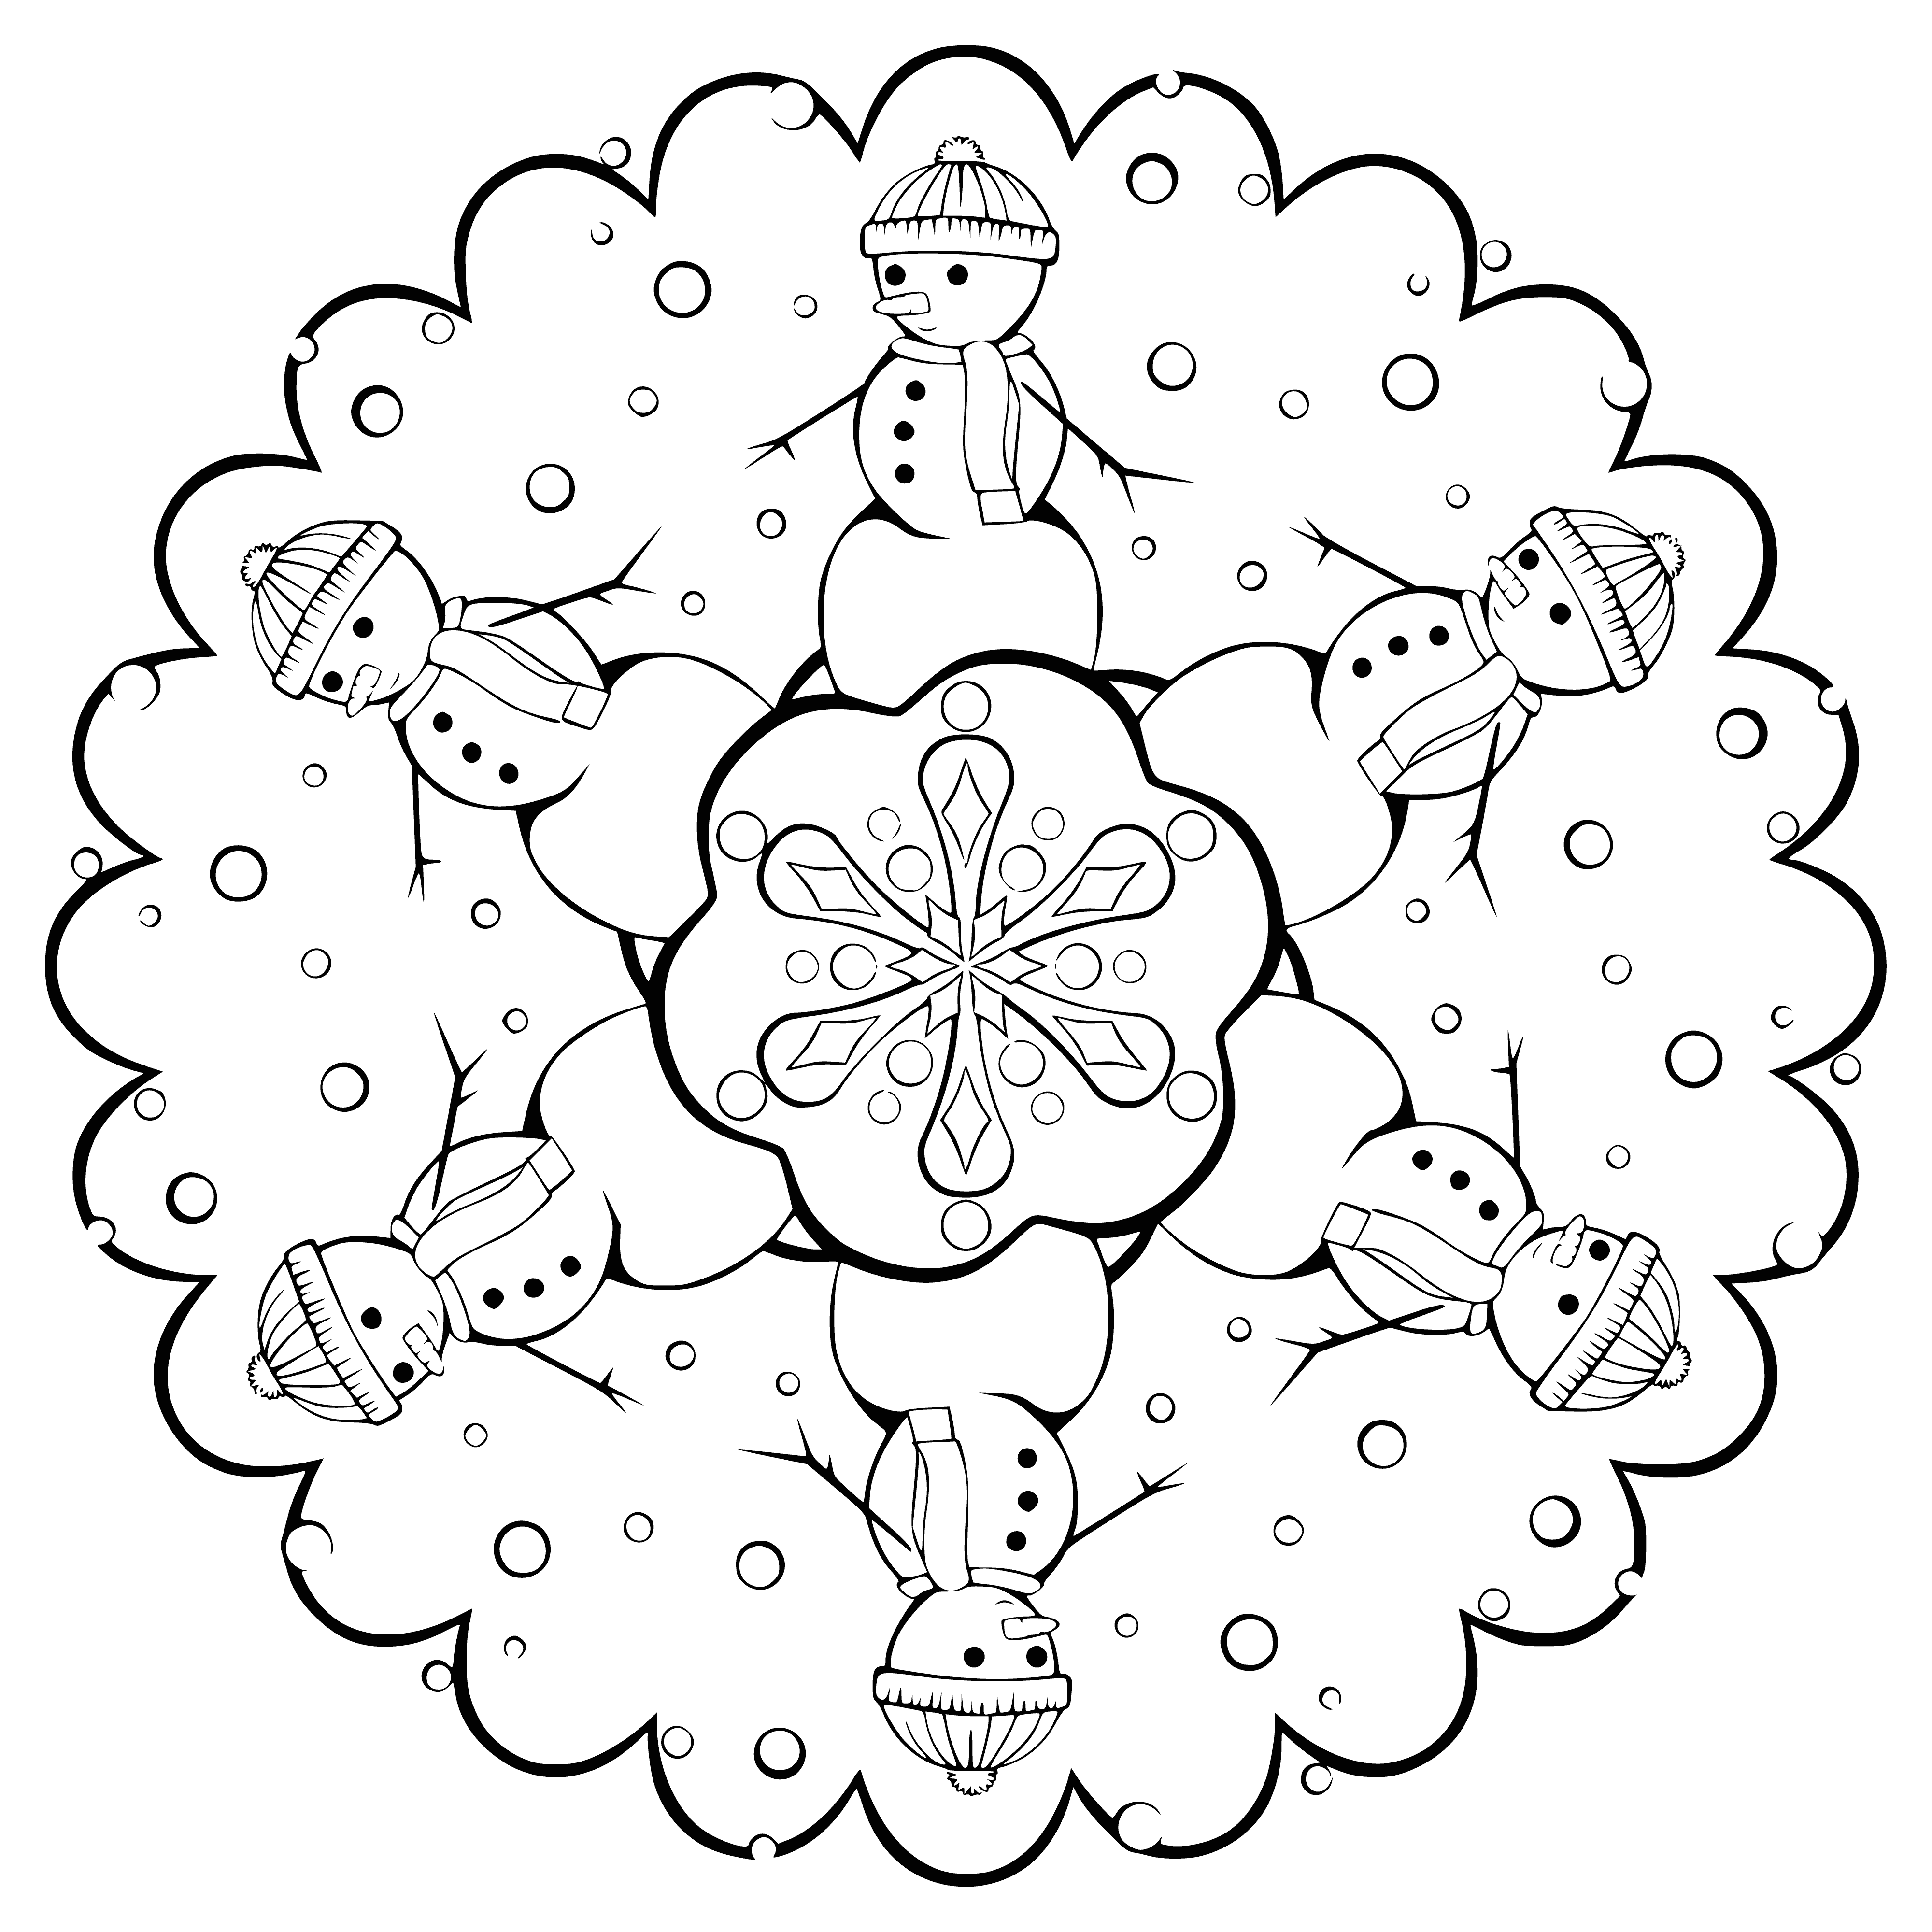 coloring page: Snow is falling, creating three snowmen wearing hats & scarves. Their sticks arms sway in the winter breeze.